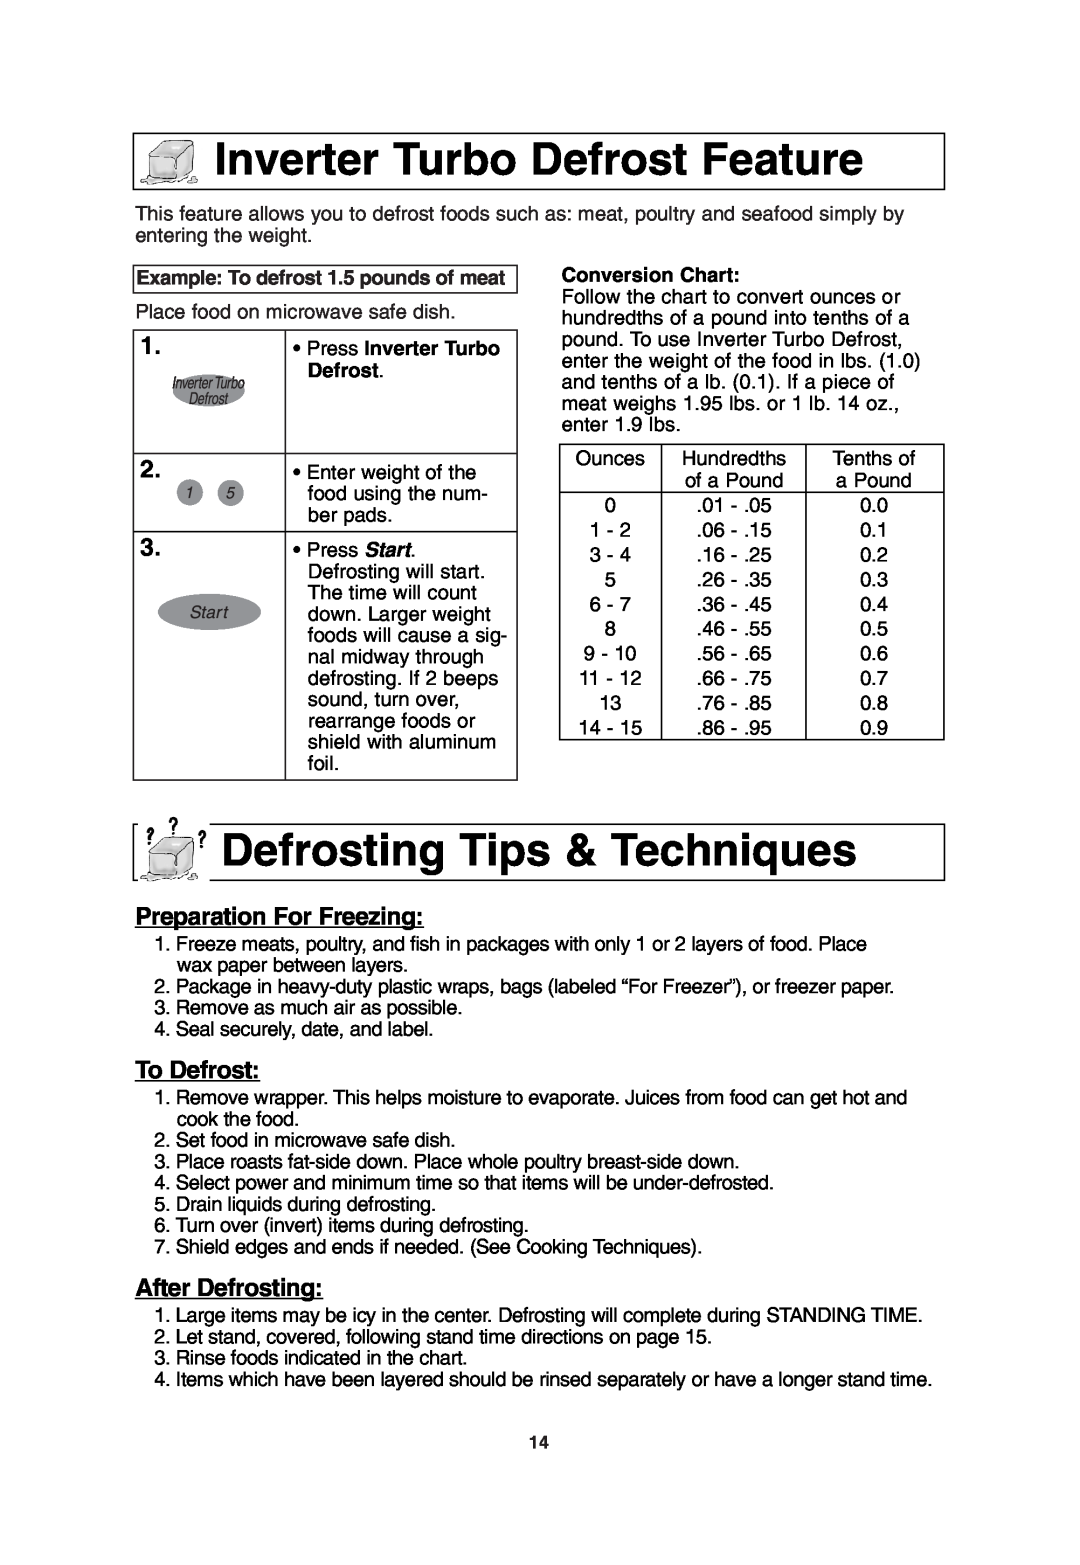 Panasonic NN-T685 Inverter Turbo Defrost Feature, Defrosting Tips & Techniques, Preparation For Freezing, To Defrost 